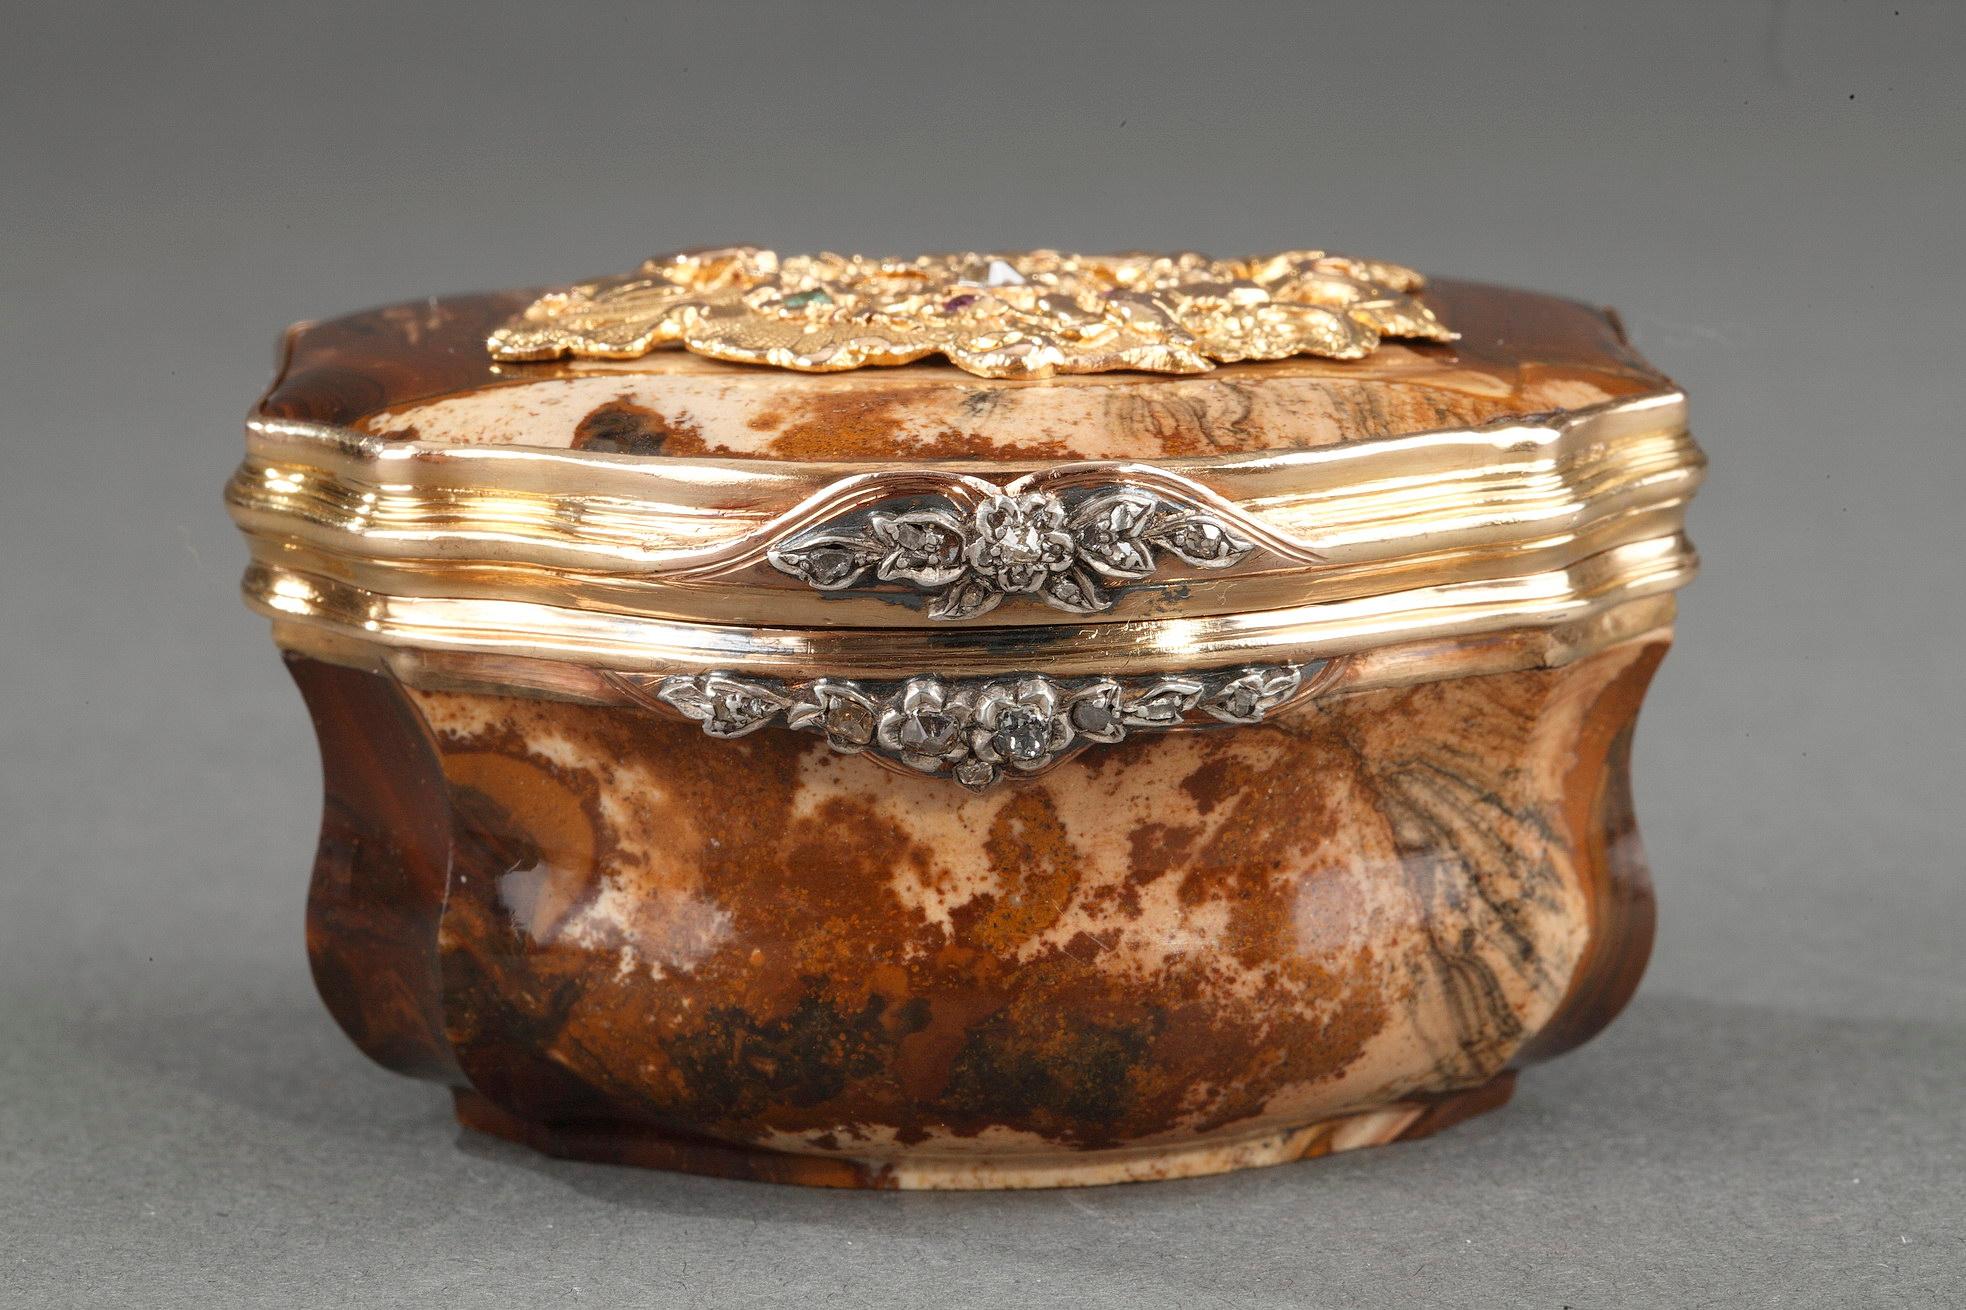 18th Century and Earlier Gold, Agate and Gemstones Snuffbox, 18th Century